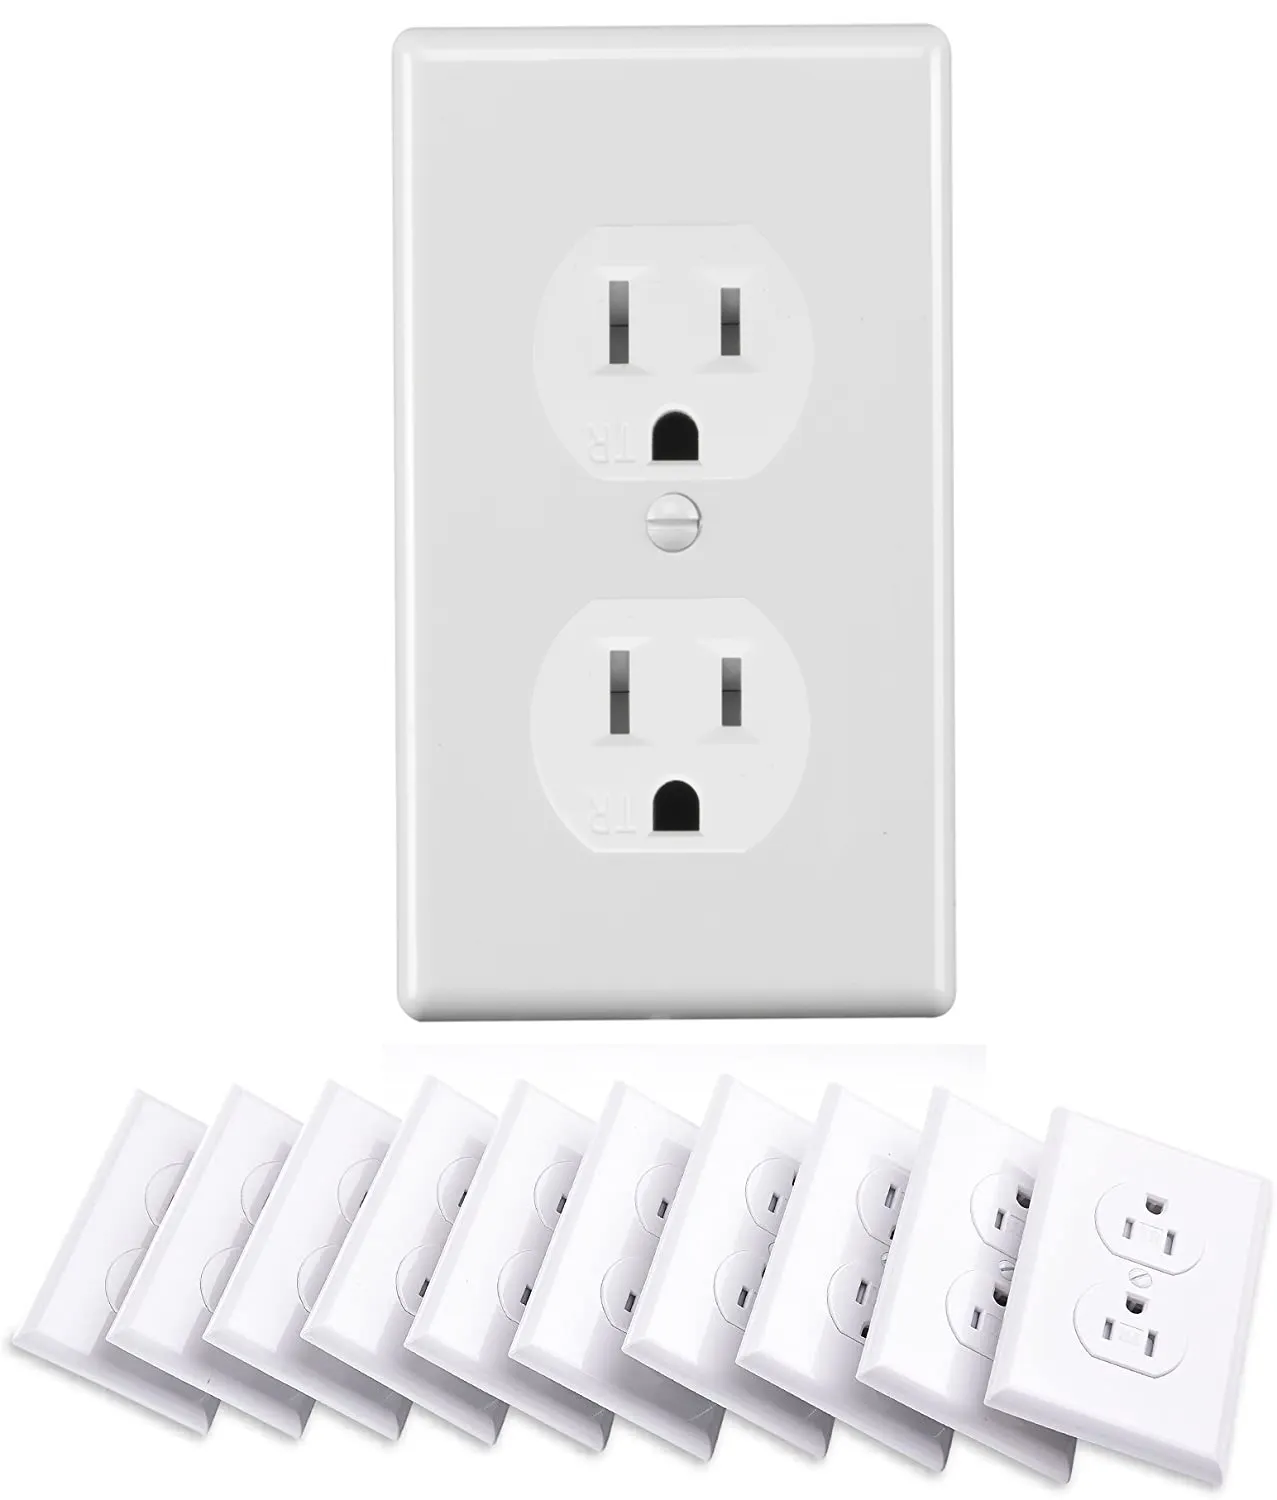 125v wall 15a amp duplex receptacle socket outlet electrical receptacle wall socket charger sockets and switches